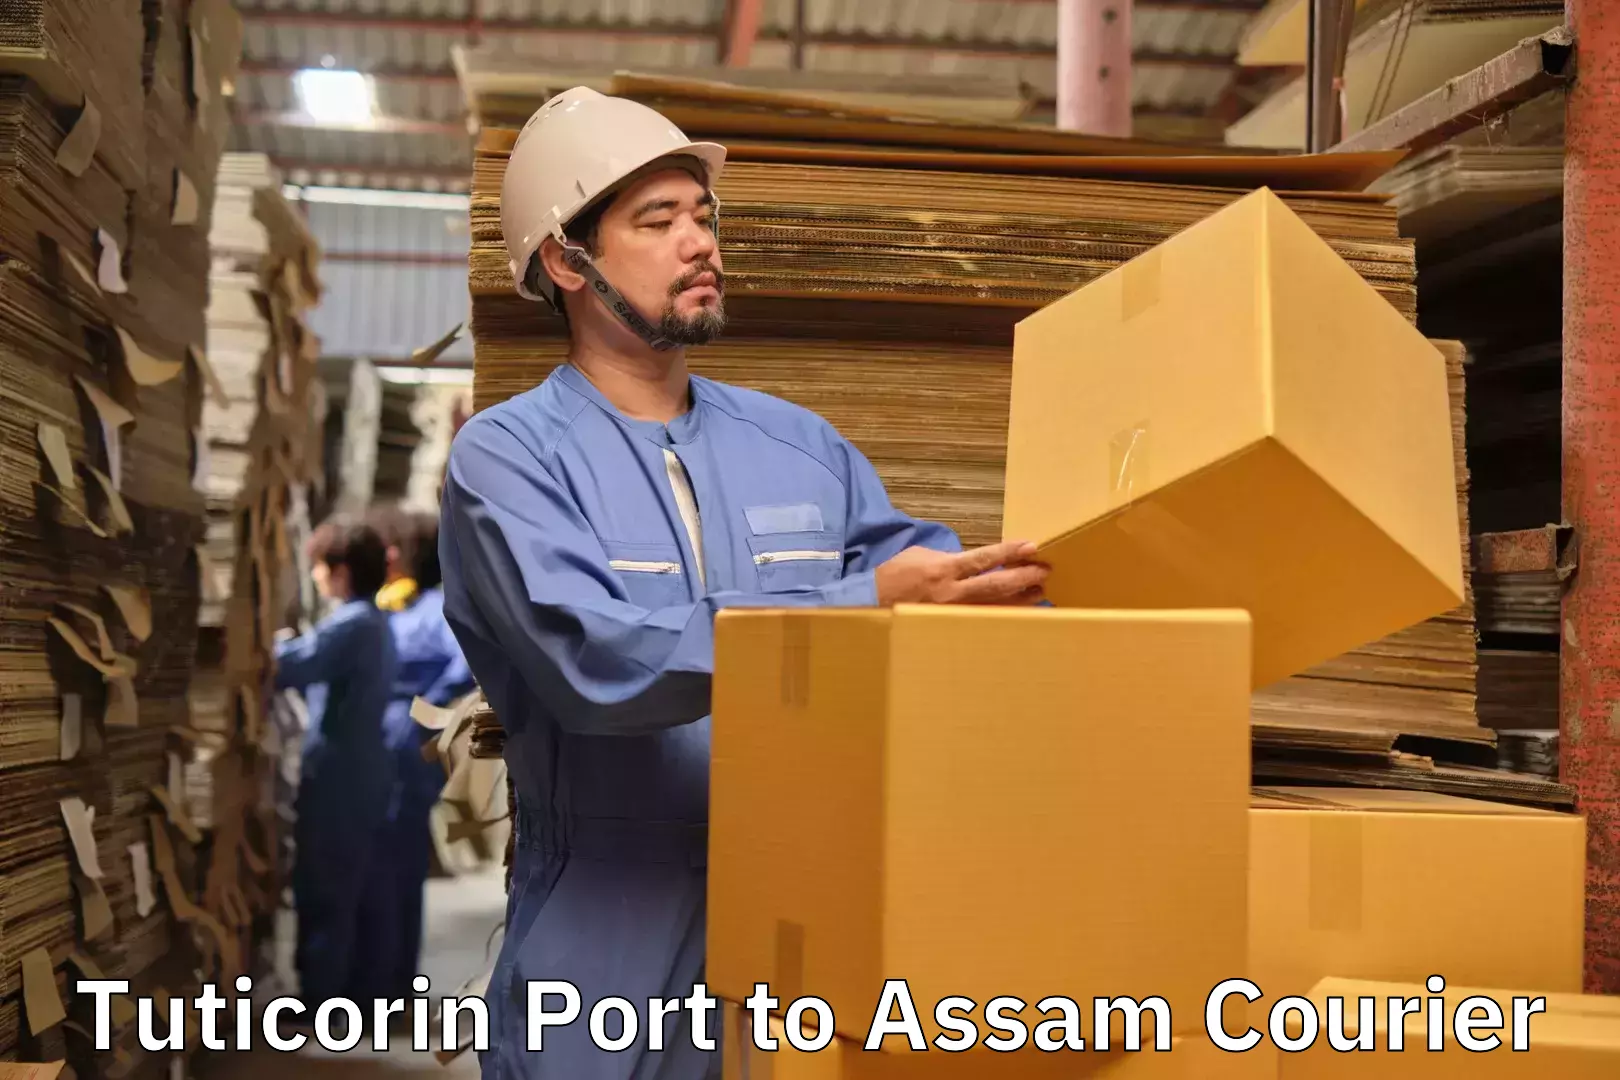 Instant baggage transport quote in Tuticorin Port to Karbi Anglong